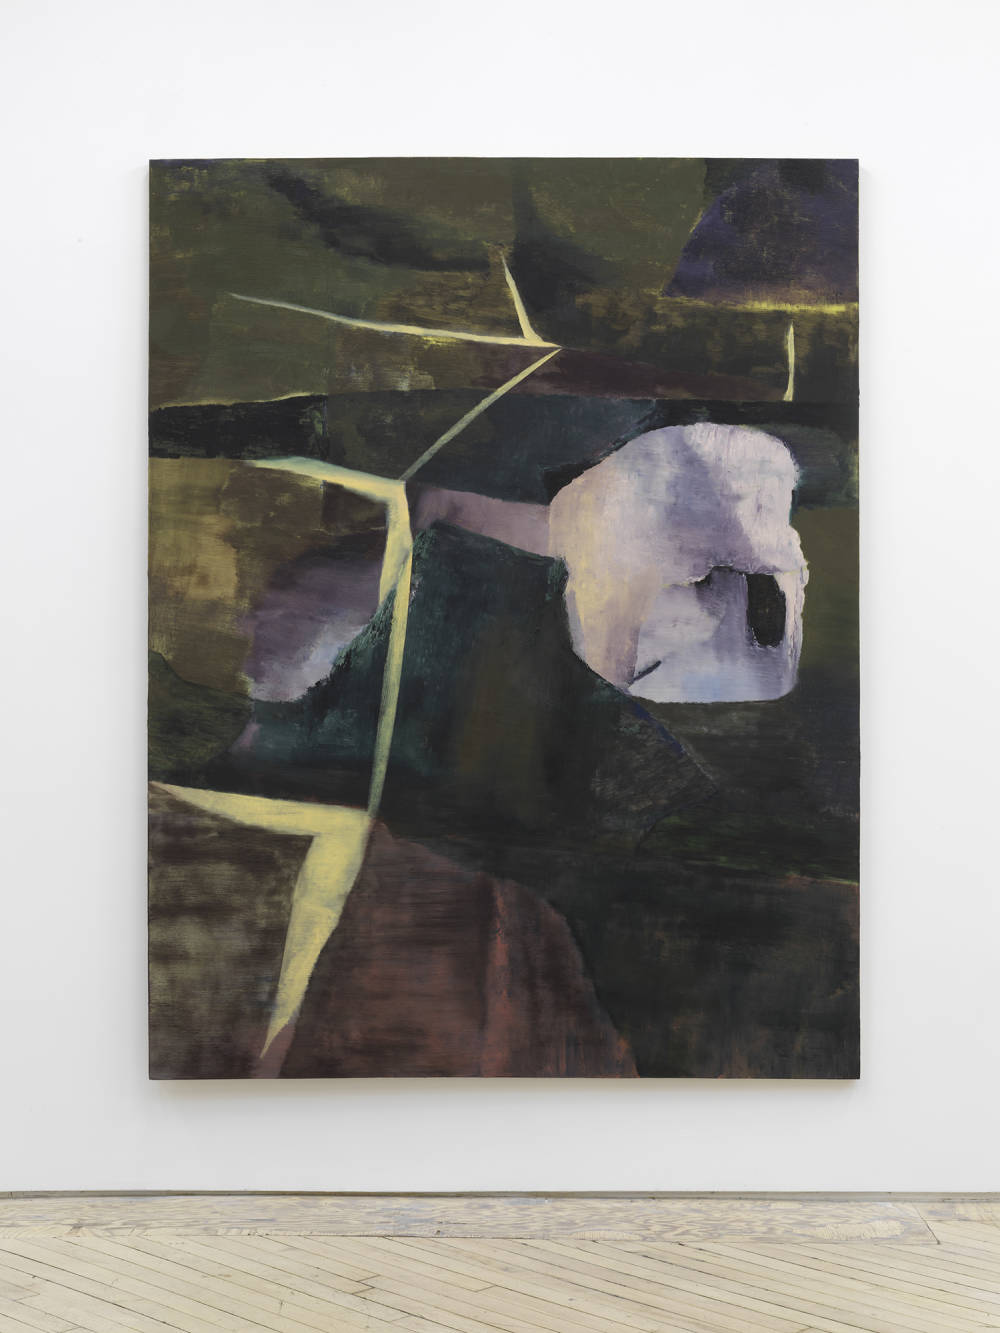 A large, gestural abstract painting rendered a range of muted earth tones installed on a gallery wall.